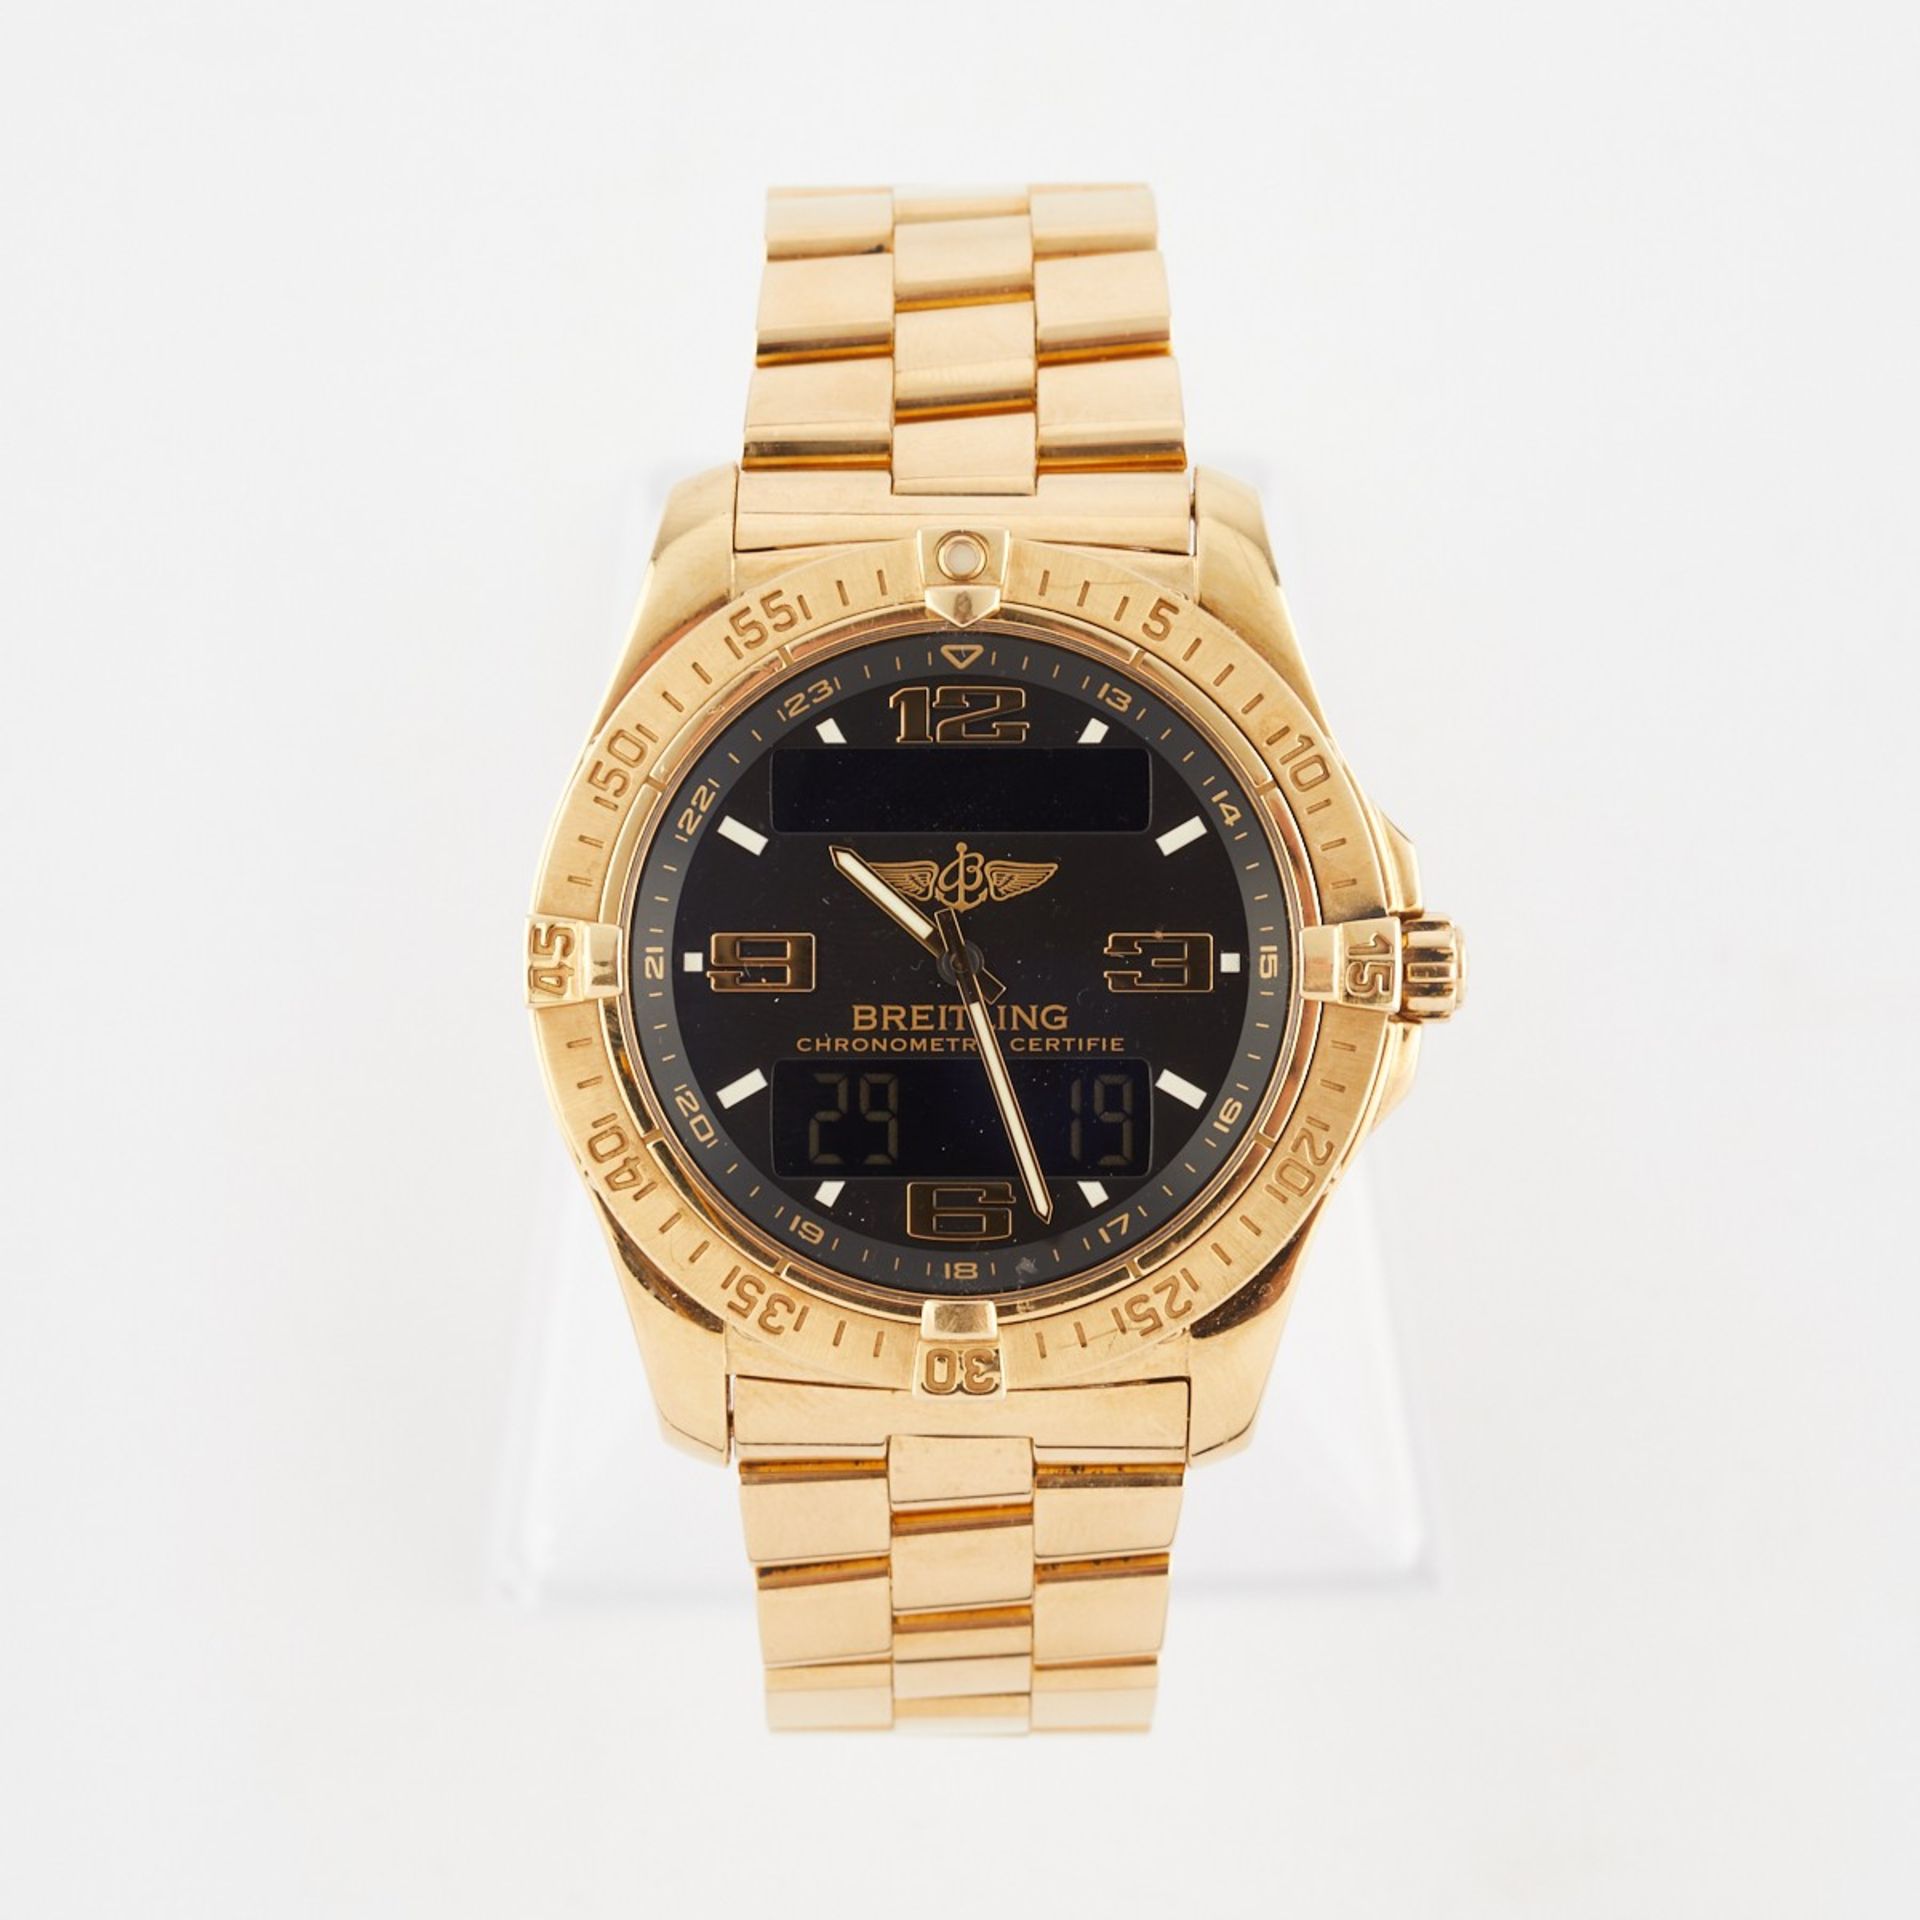 Limited Edition 18K Gold Breitling Aerospace Watch - Image 2 of 10